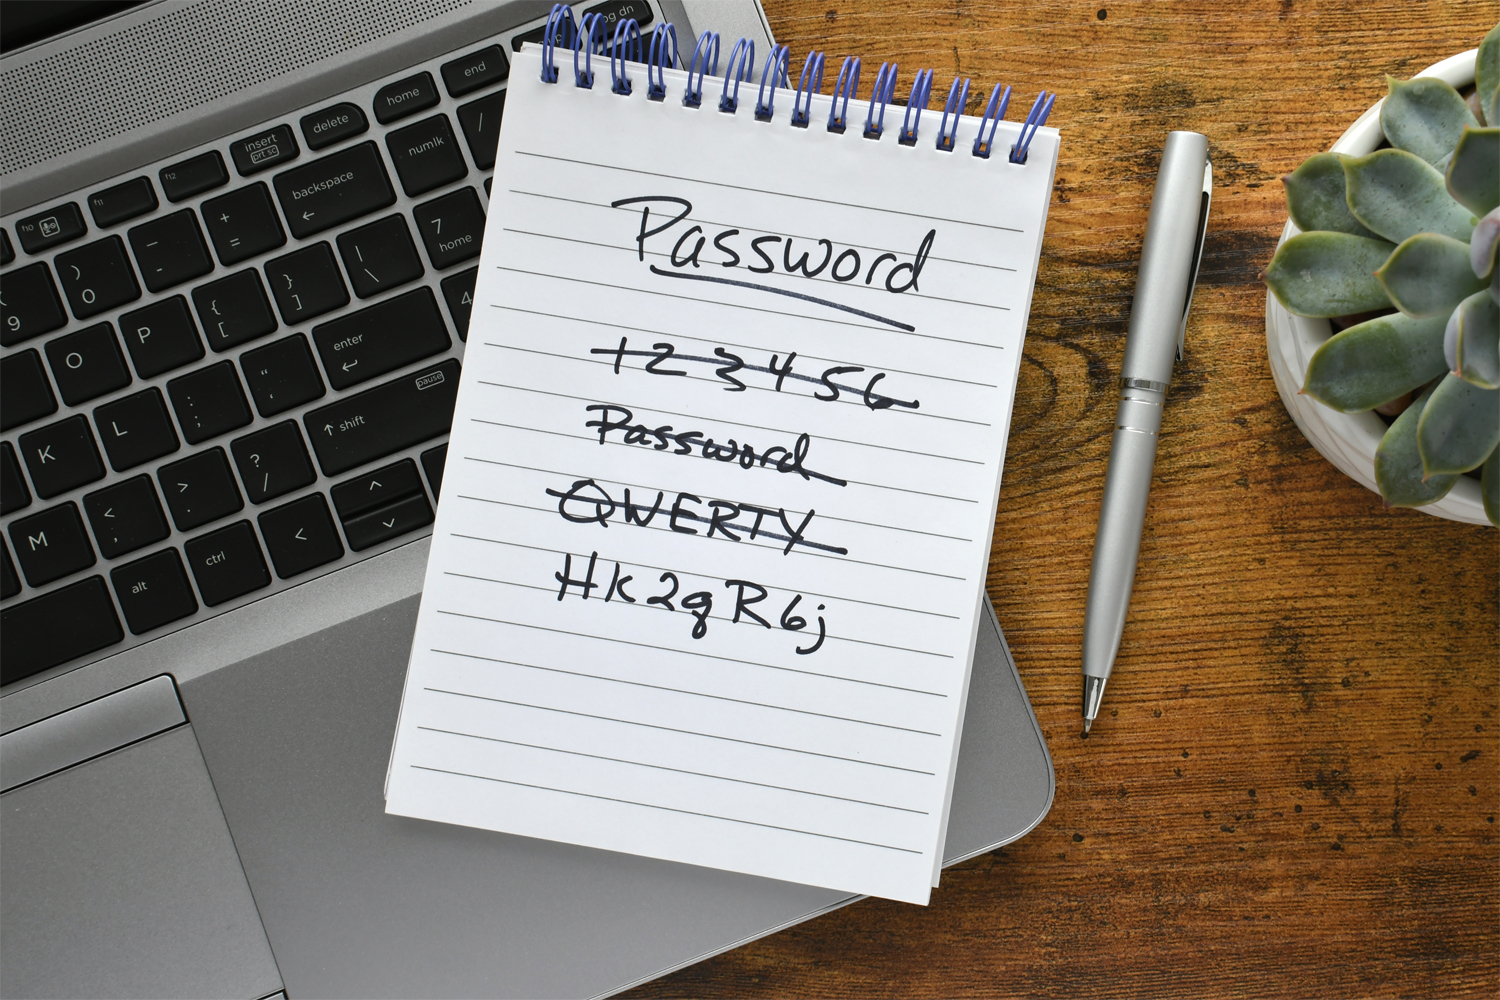 Using Secure Passwords